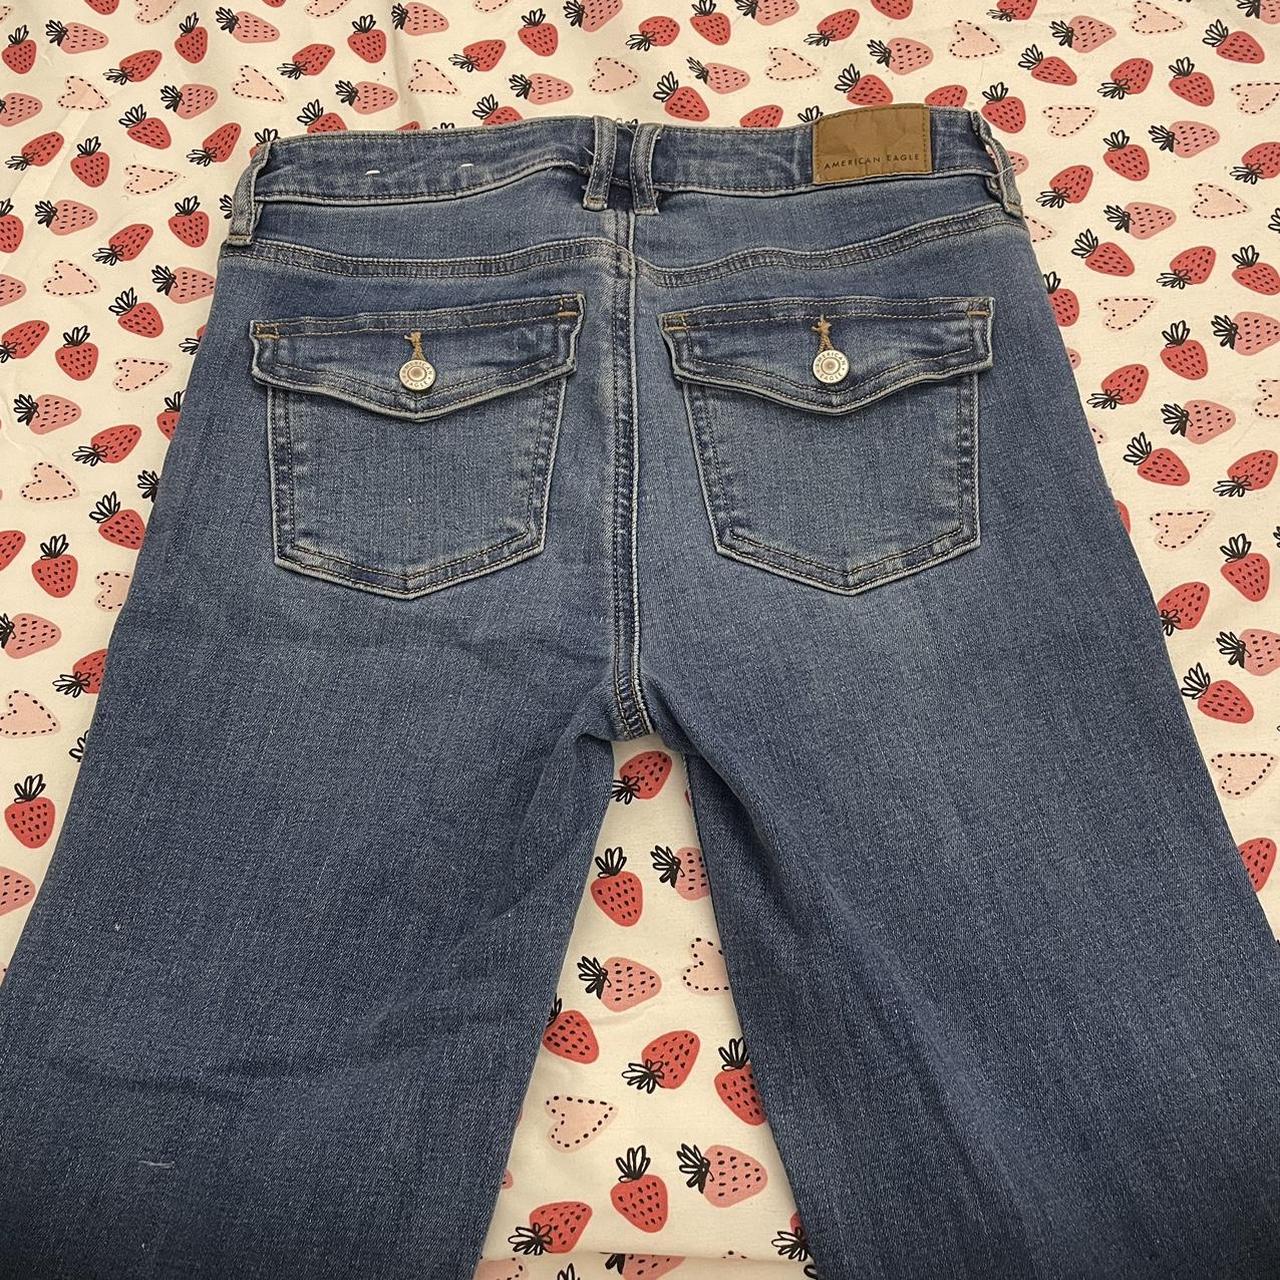 American eagle low rise flare jeans size 0... - Depop